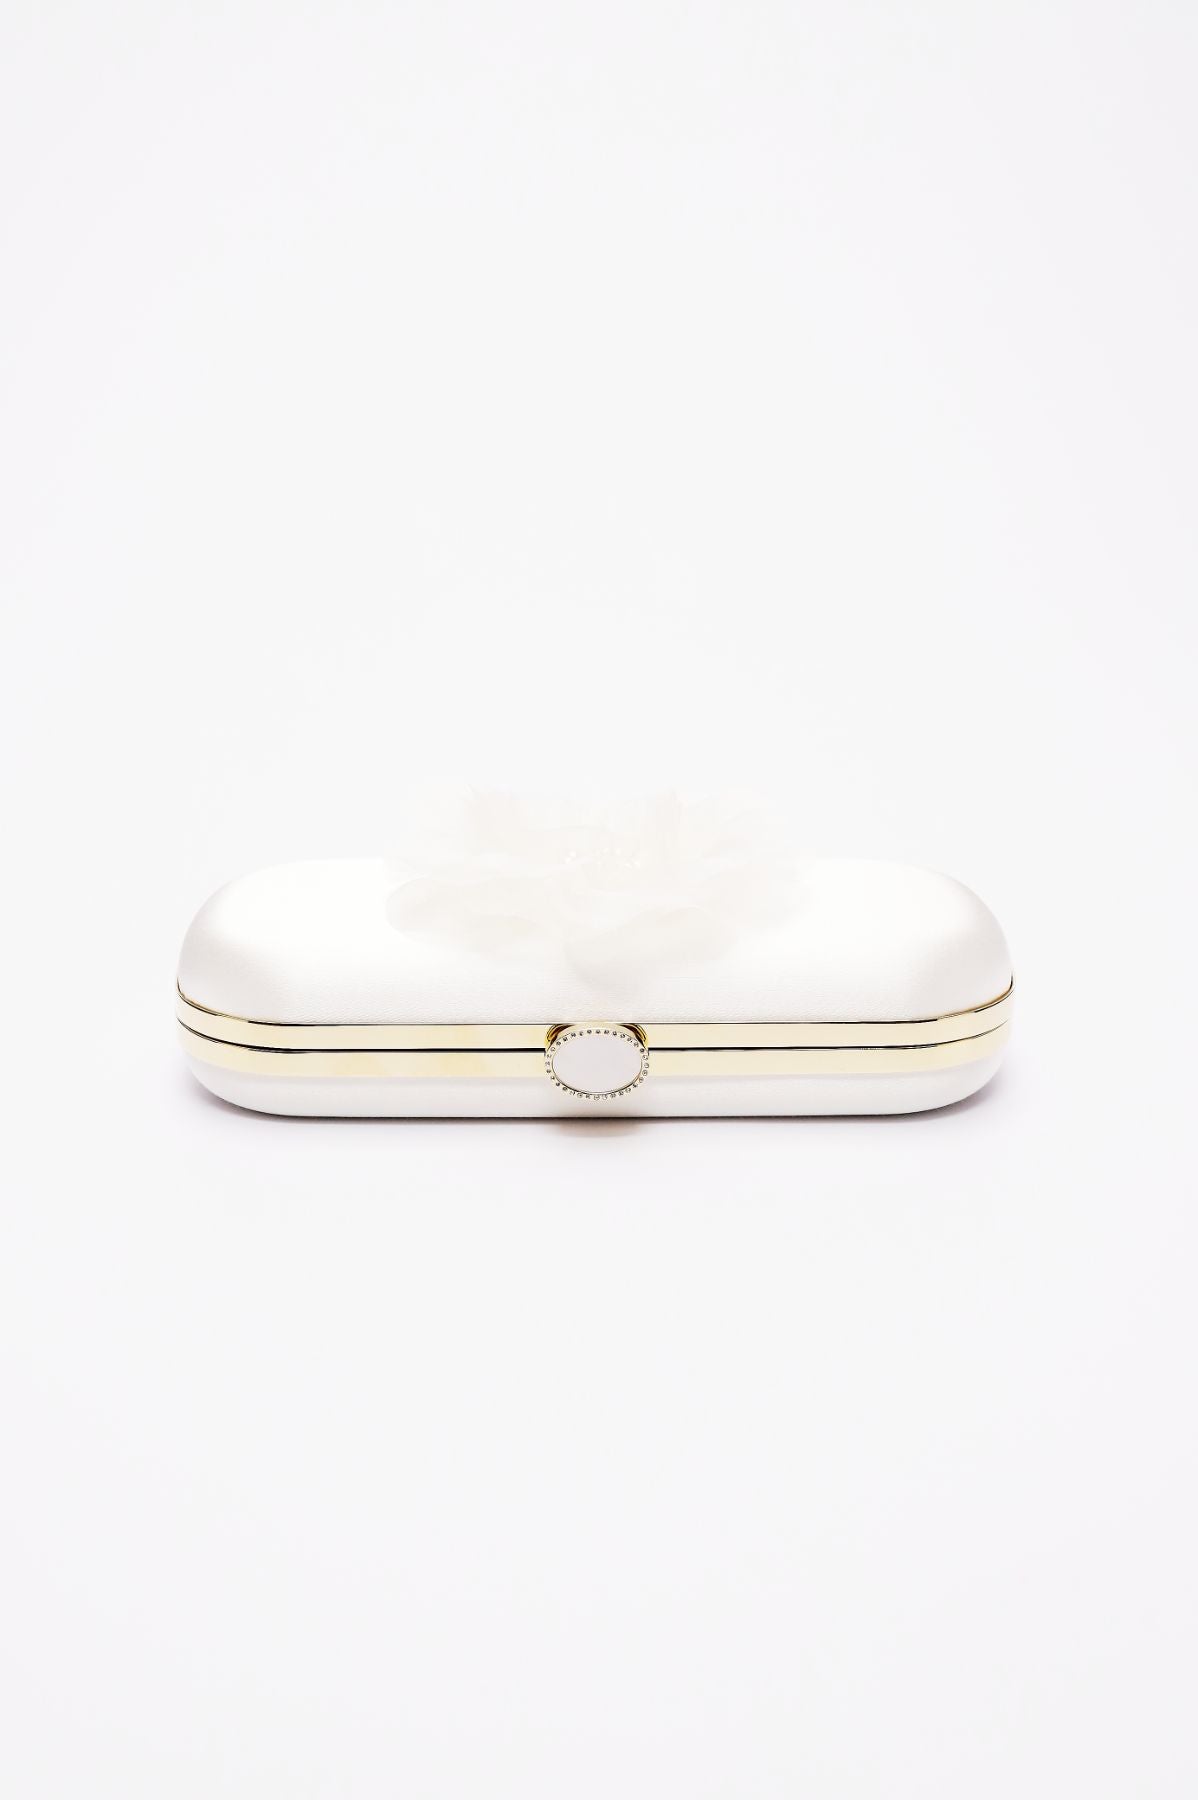 Bella Fiori Clutch Ivory Clutch Petite from The Bella Rosa Collection with floral detail and gold trim against a white background.